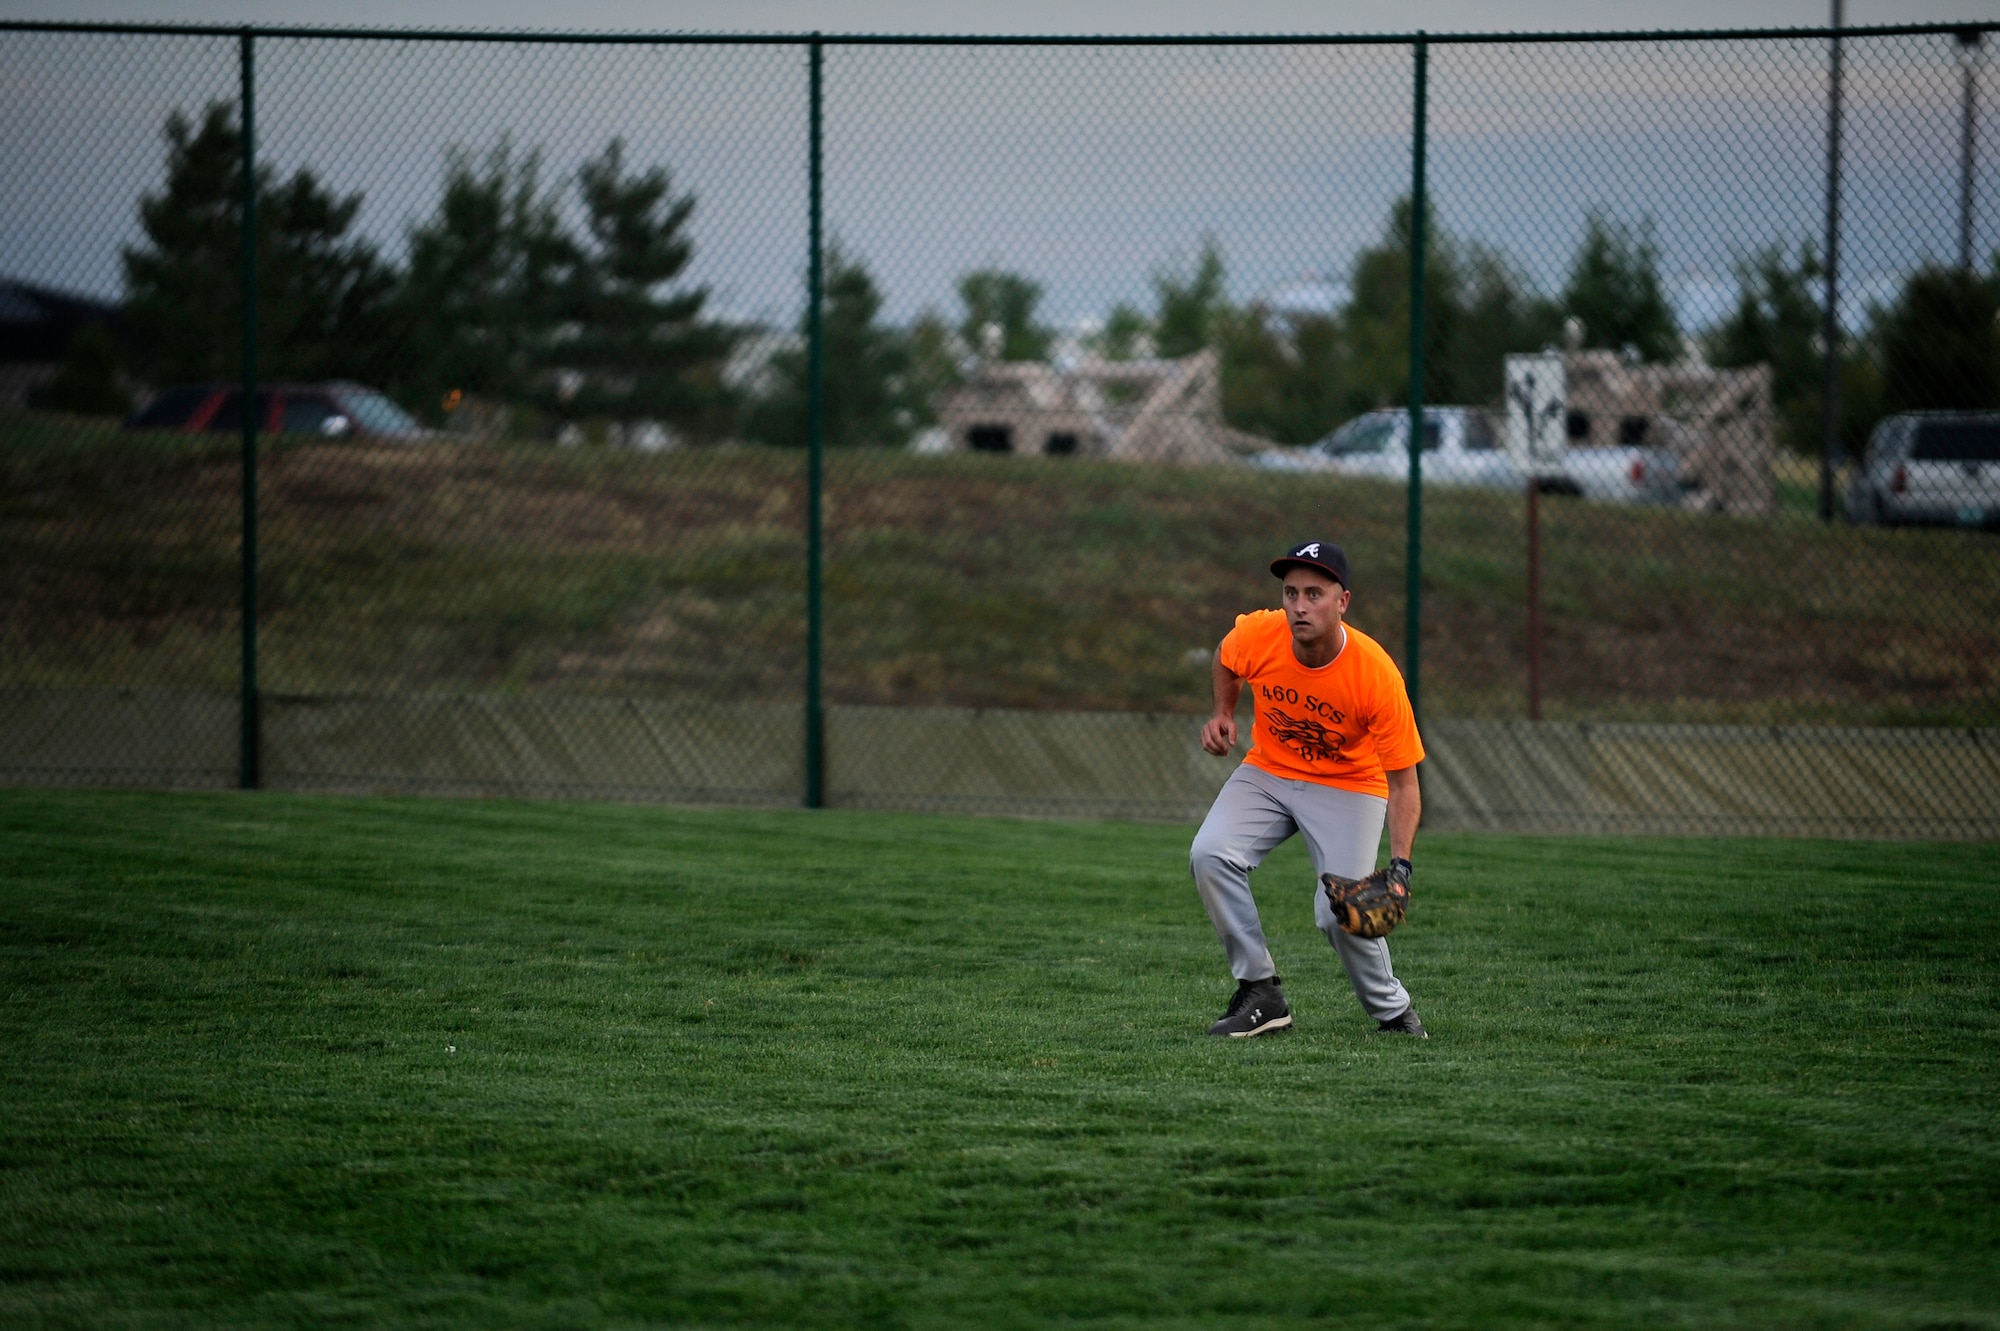 BUCKLEY AIR FORCE BASE, Colo. – Dustin Sneed, 460th Space Communications Squadron, moves in for a catch during the softball finals Sept. 14. The 460th Space Communications Squadron beat Naval Information Operations Command – Colorado 16-6 and 13-3 in a double elimination base championship final.  (U.S. Air Force photo by Senior Airman Steven Czyz)